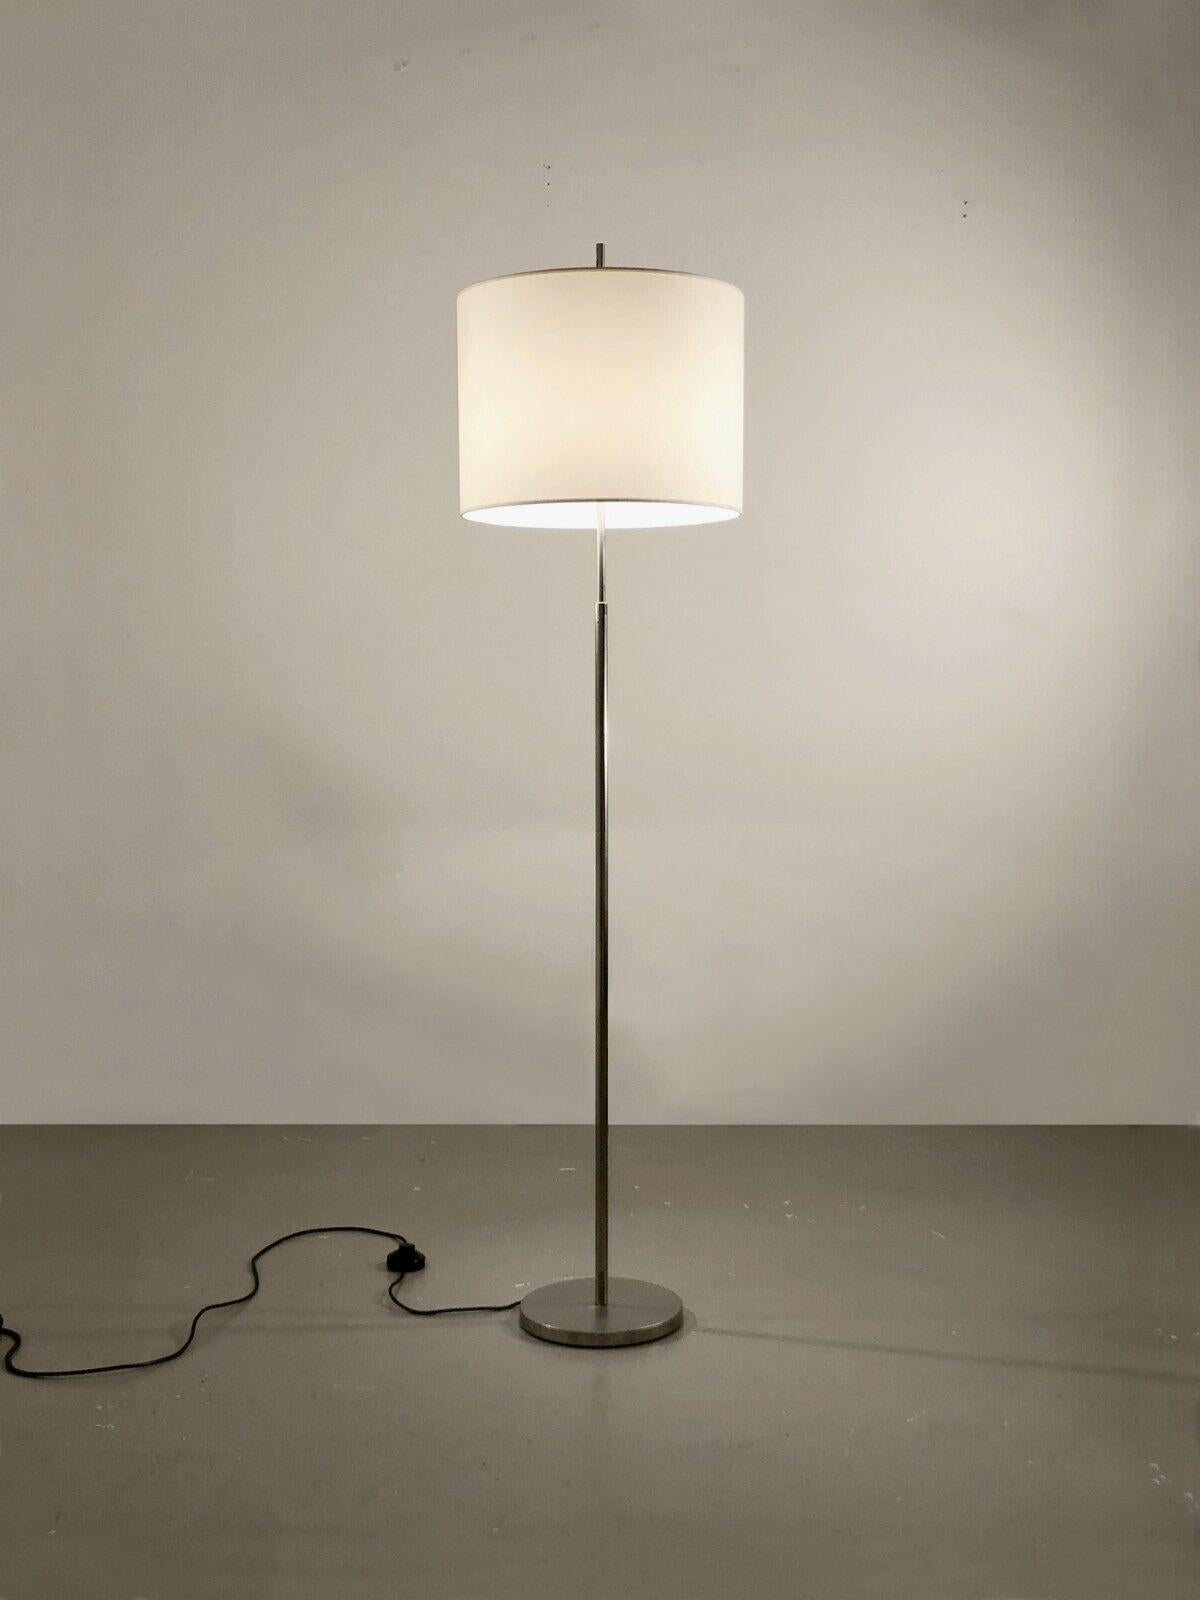 A rare telescopic floor lamp, by Giuseppe Ostuni & Forti, O-luce edition, Italy 1970. 
This floor lamp is Minimalist, Moderniste, Space-Age. Its base is weighted and circular and as the vertical axis comes in nickeled steel; its abat-jour is